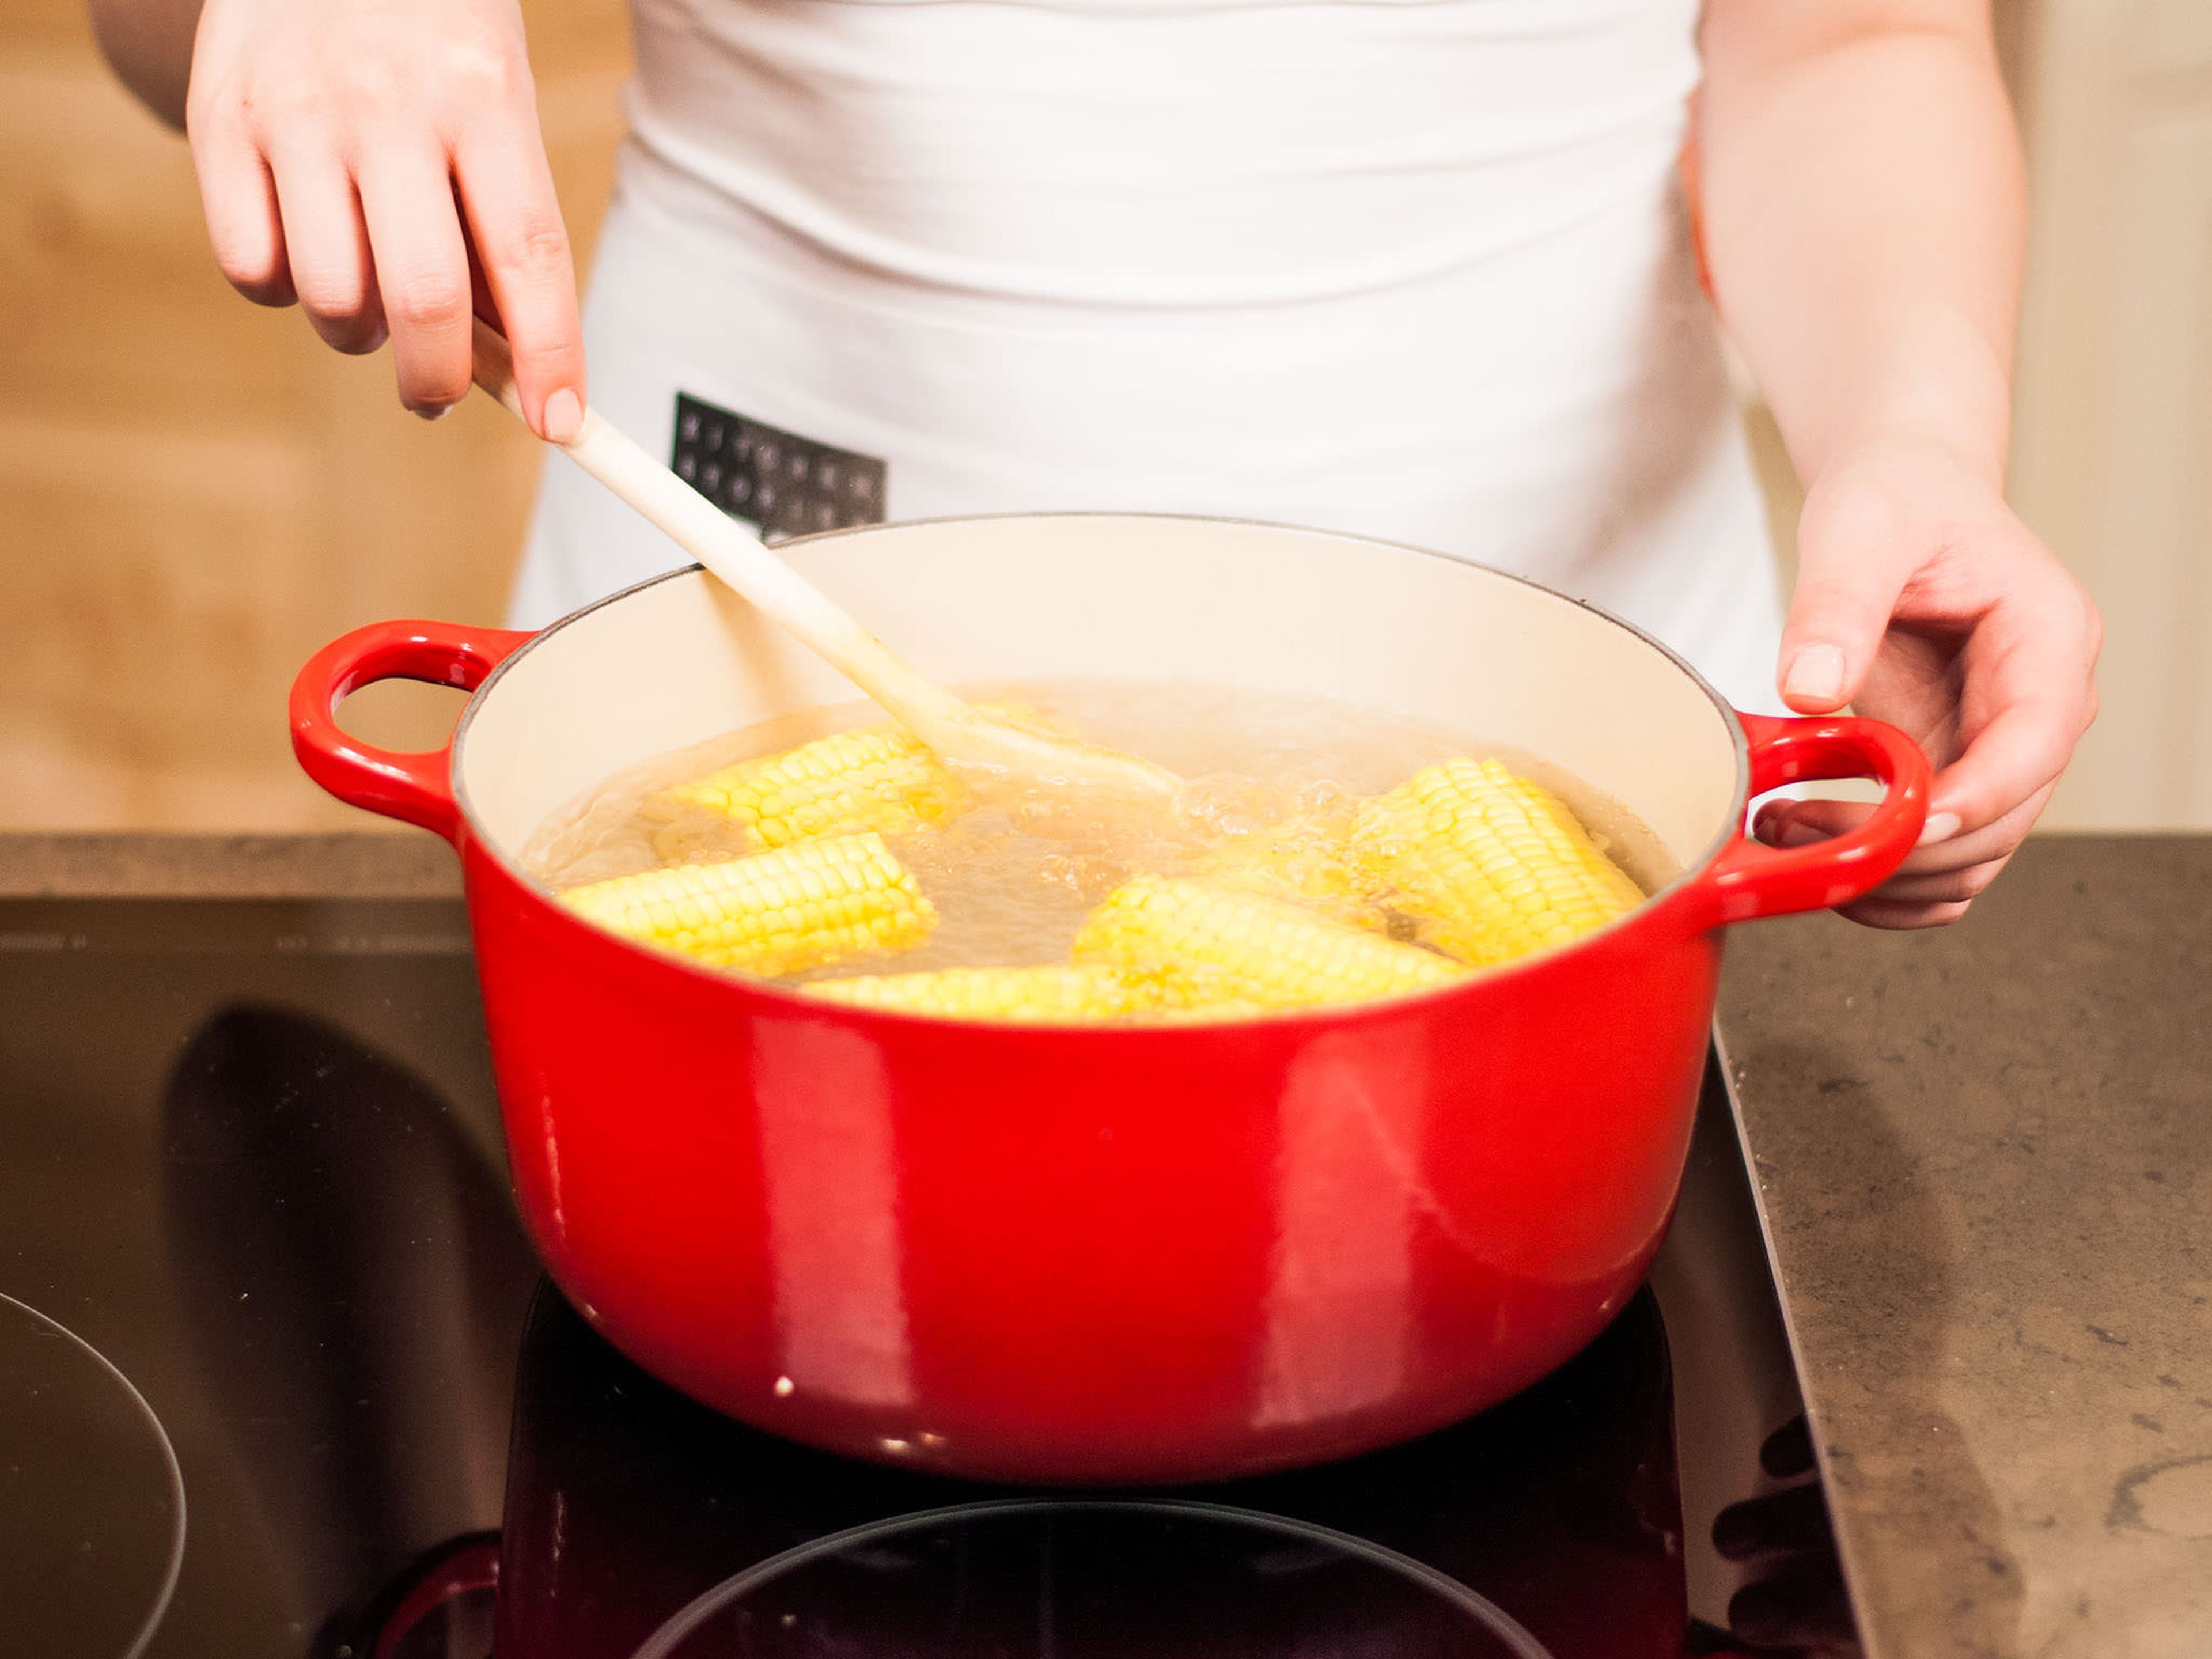 Preheat the grill. Cut off the tough ends of sweet corn and divide into serving sizes. Precook sweet corn in salted boiling water for approx. 15 – 20 min.